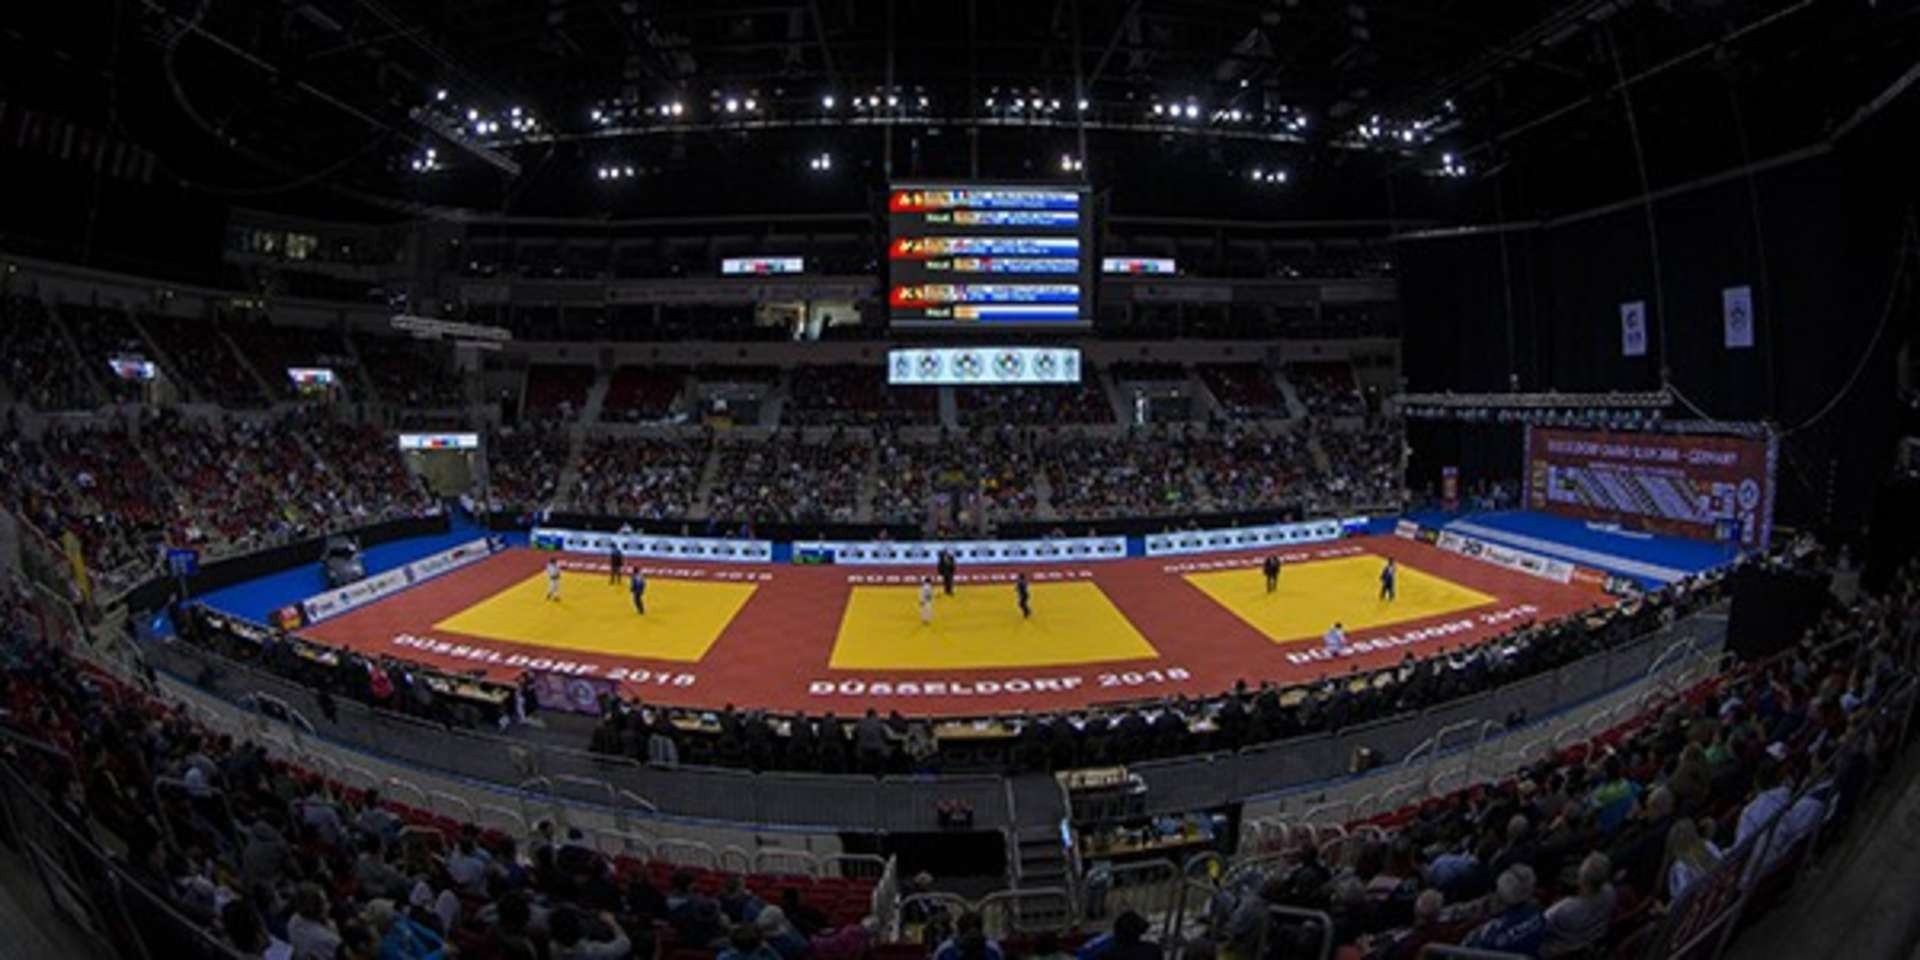 The event in Düsseldorf is the first time Germany has hosted an IJF World Tour event ©IJF